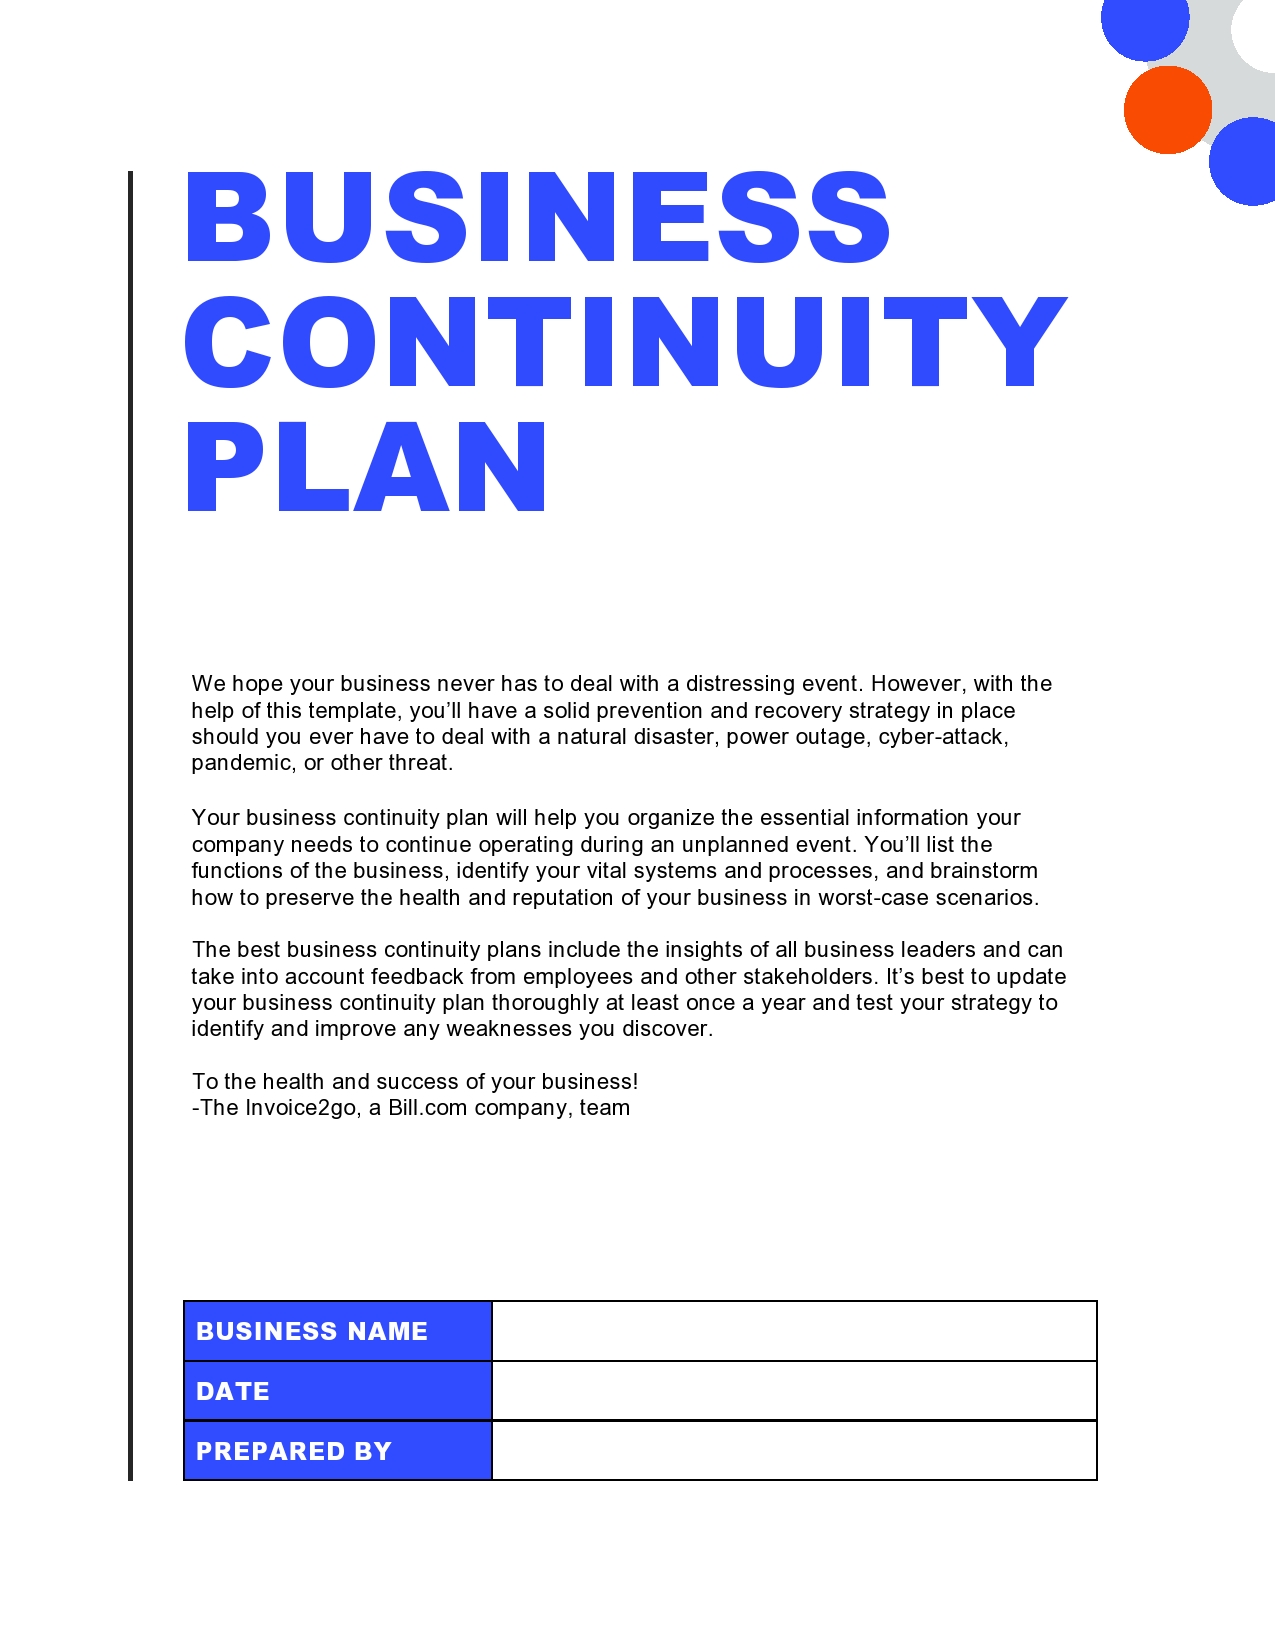 Free business continuity plan template 18